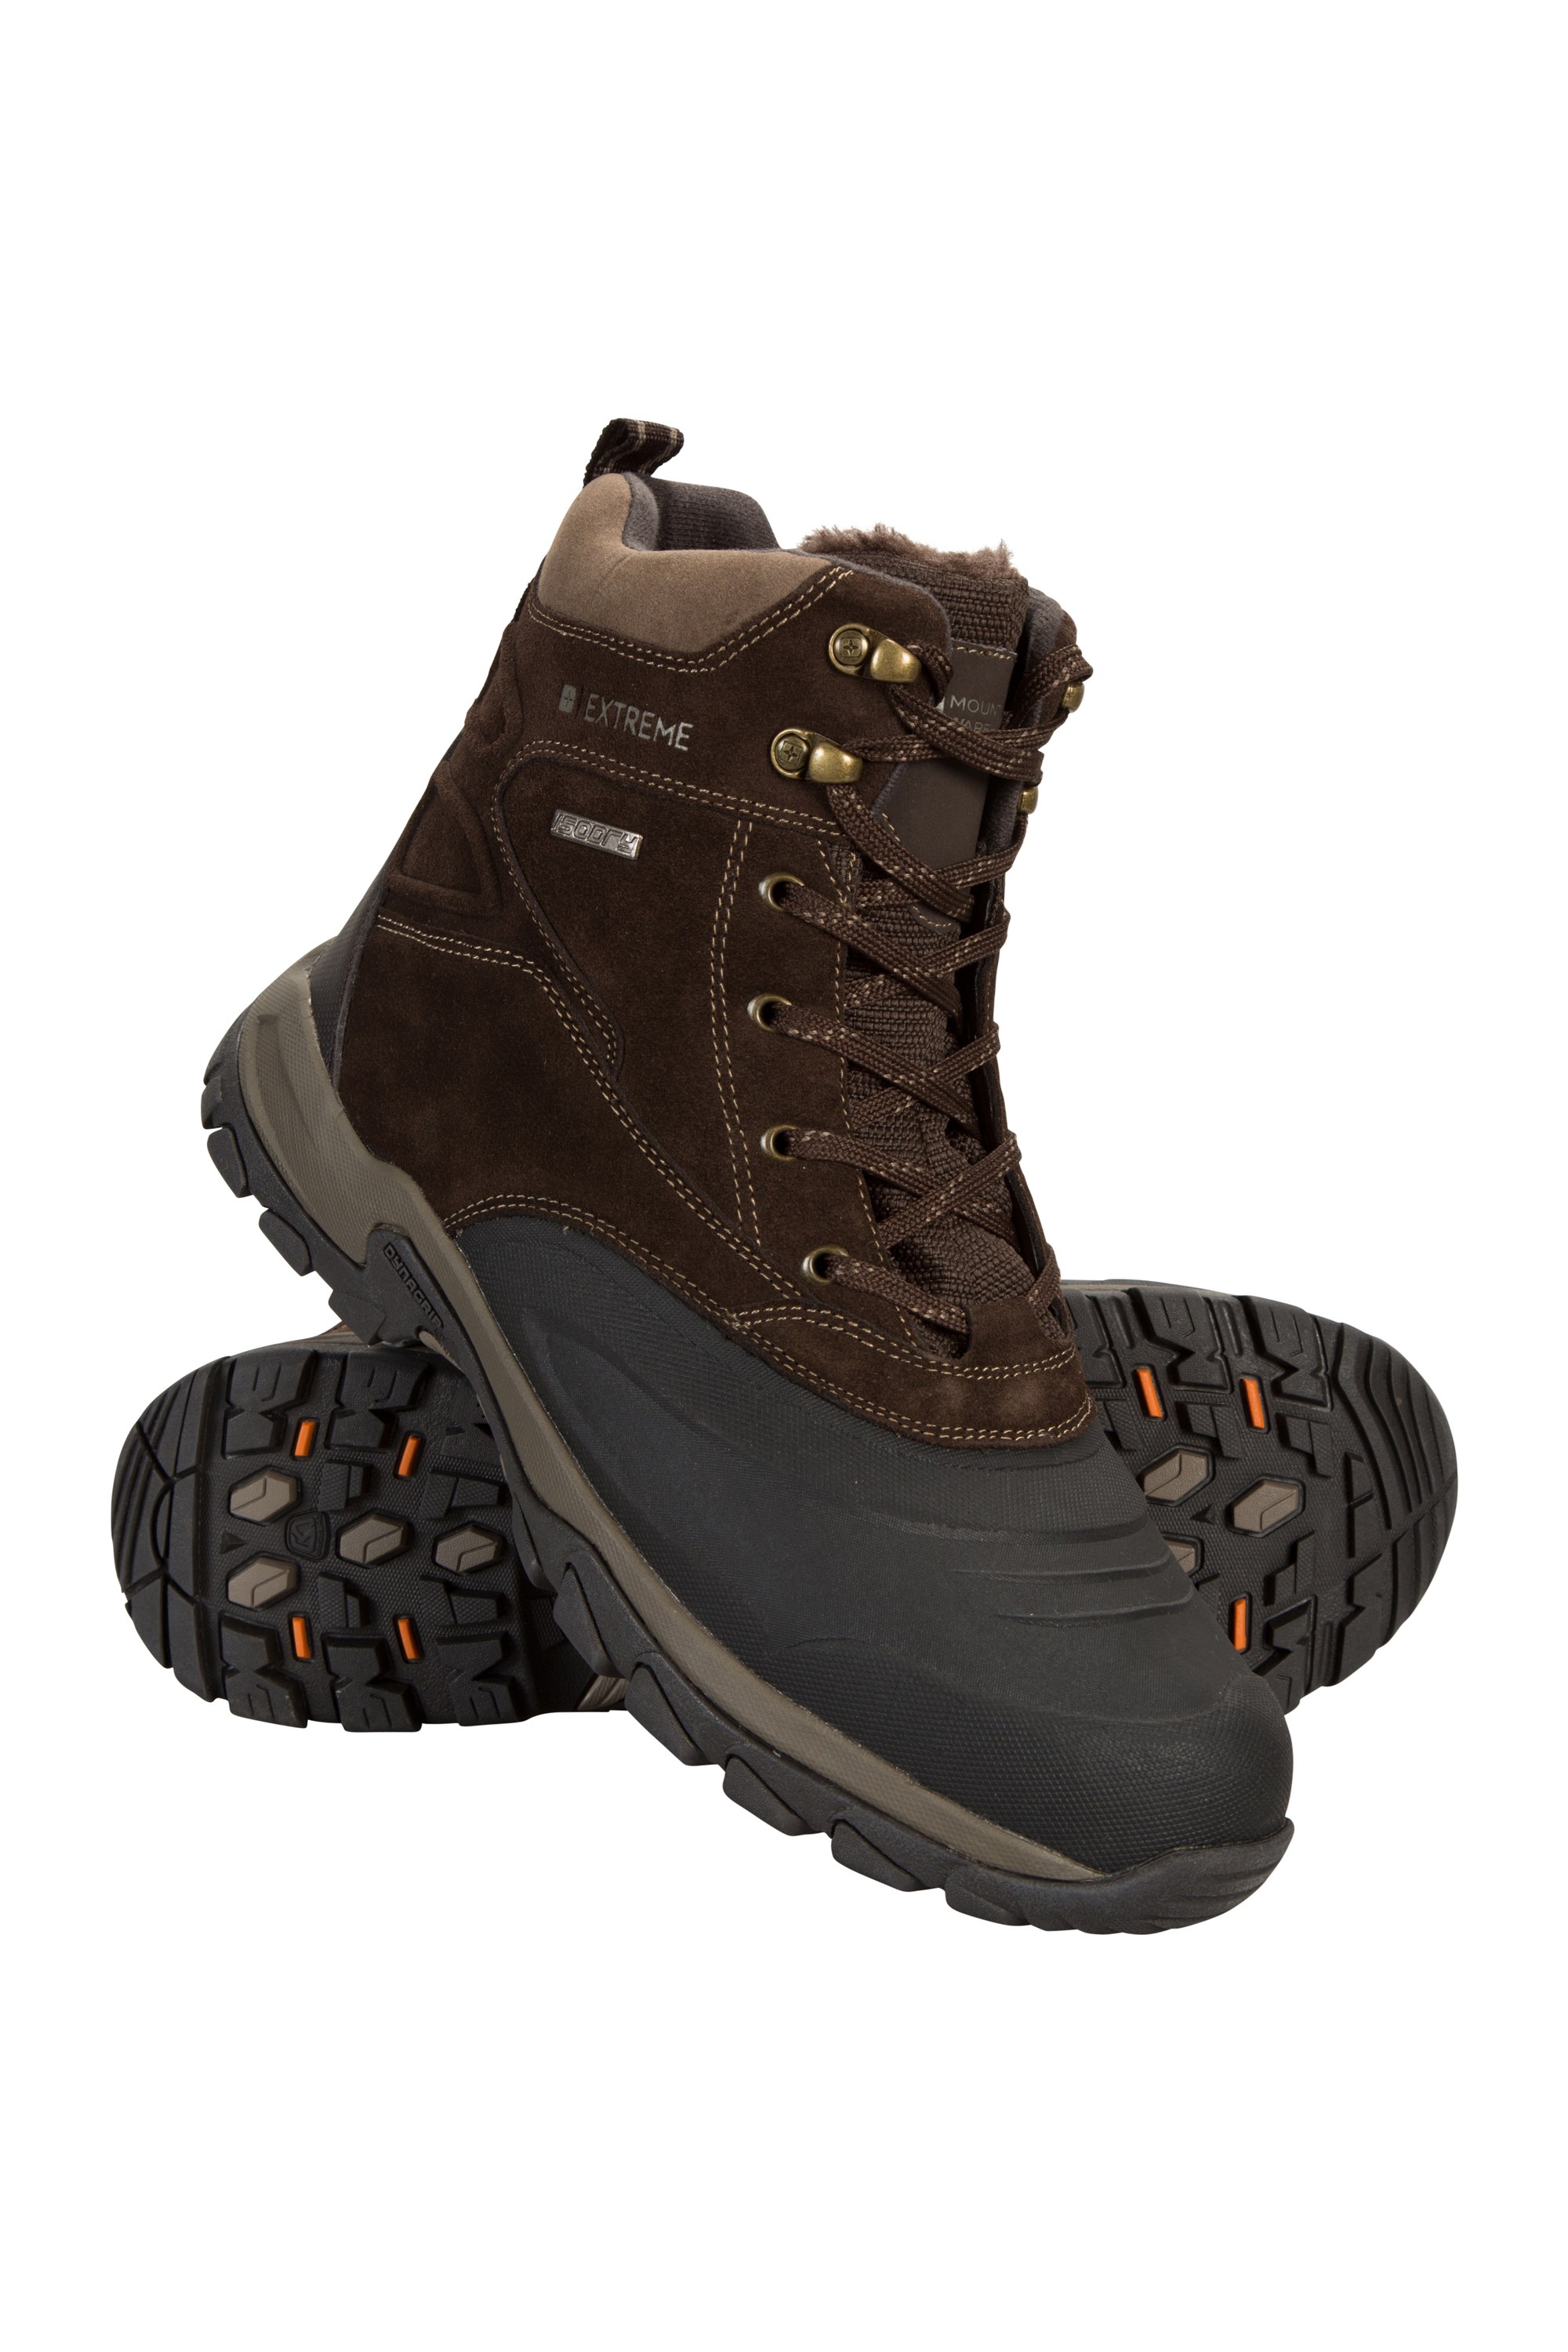 mens low snow boots